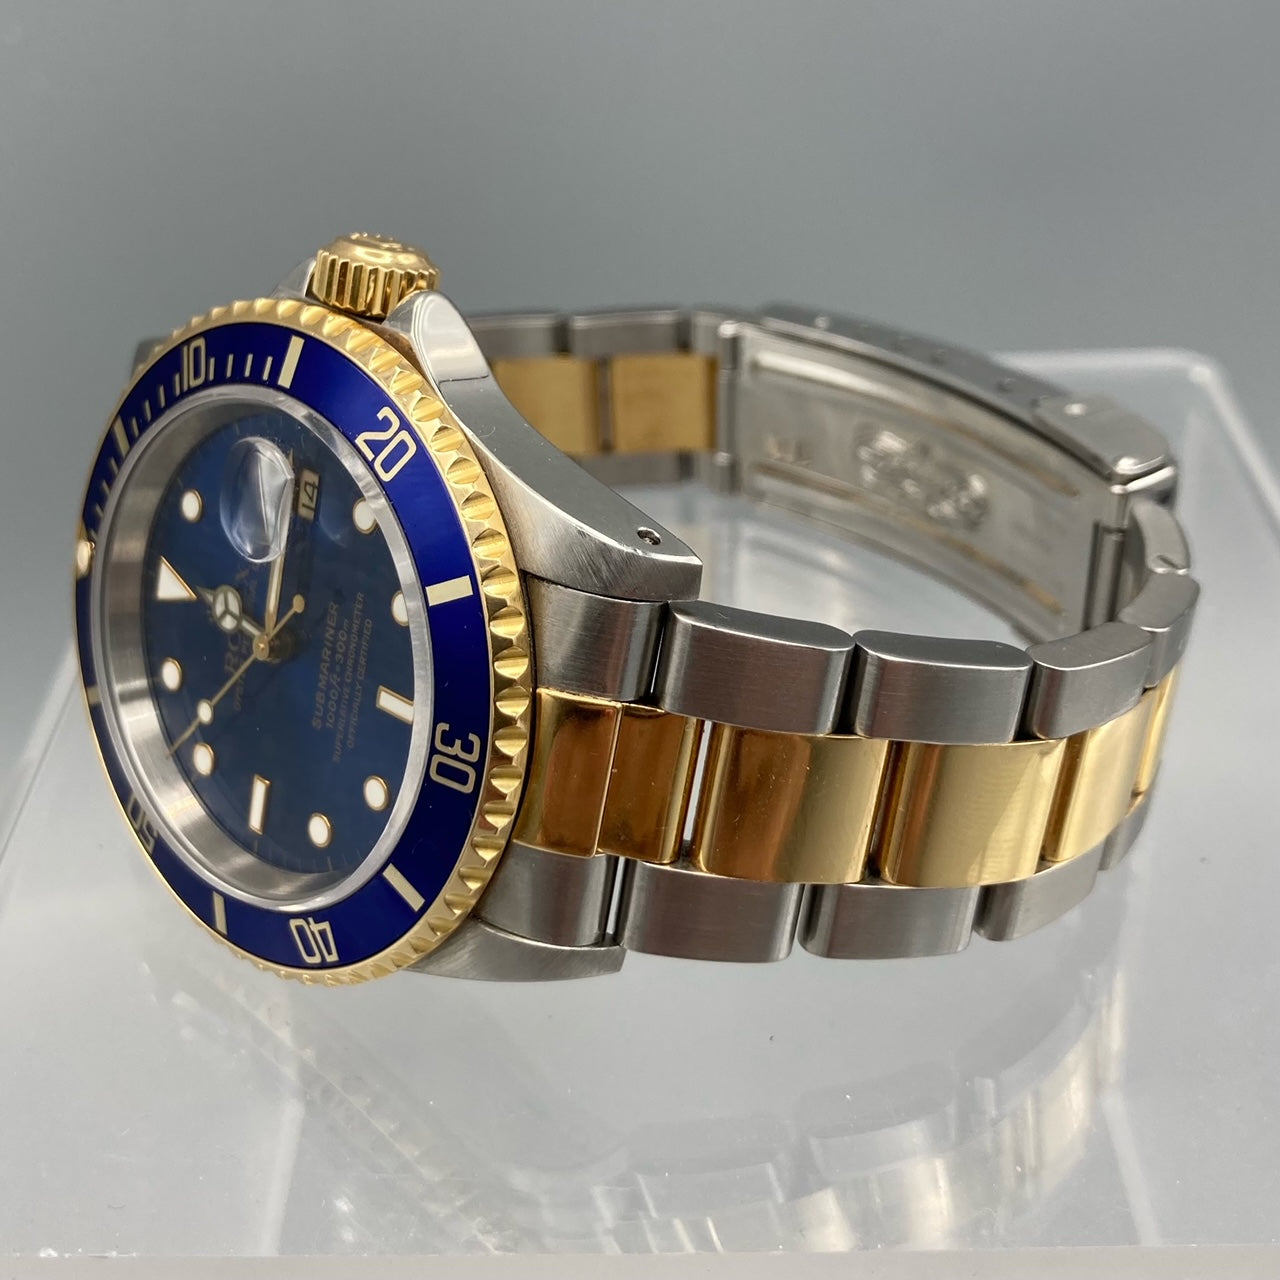 Rolex Submariner Date 40mm BLUE DIAL Two-Tone Watch 16613